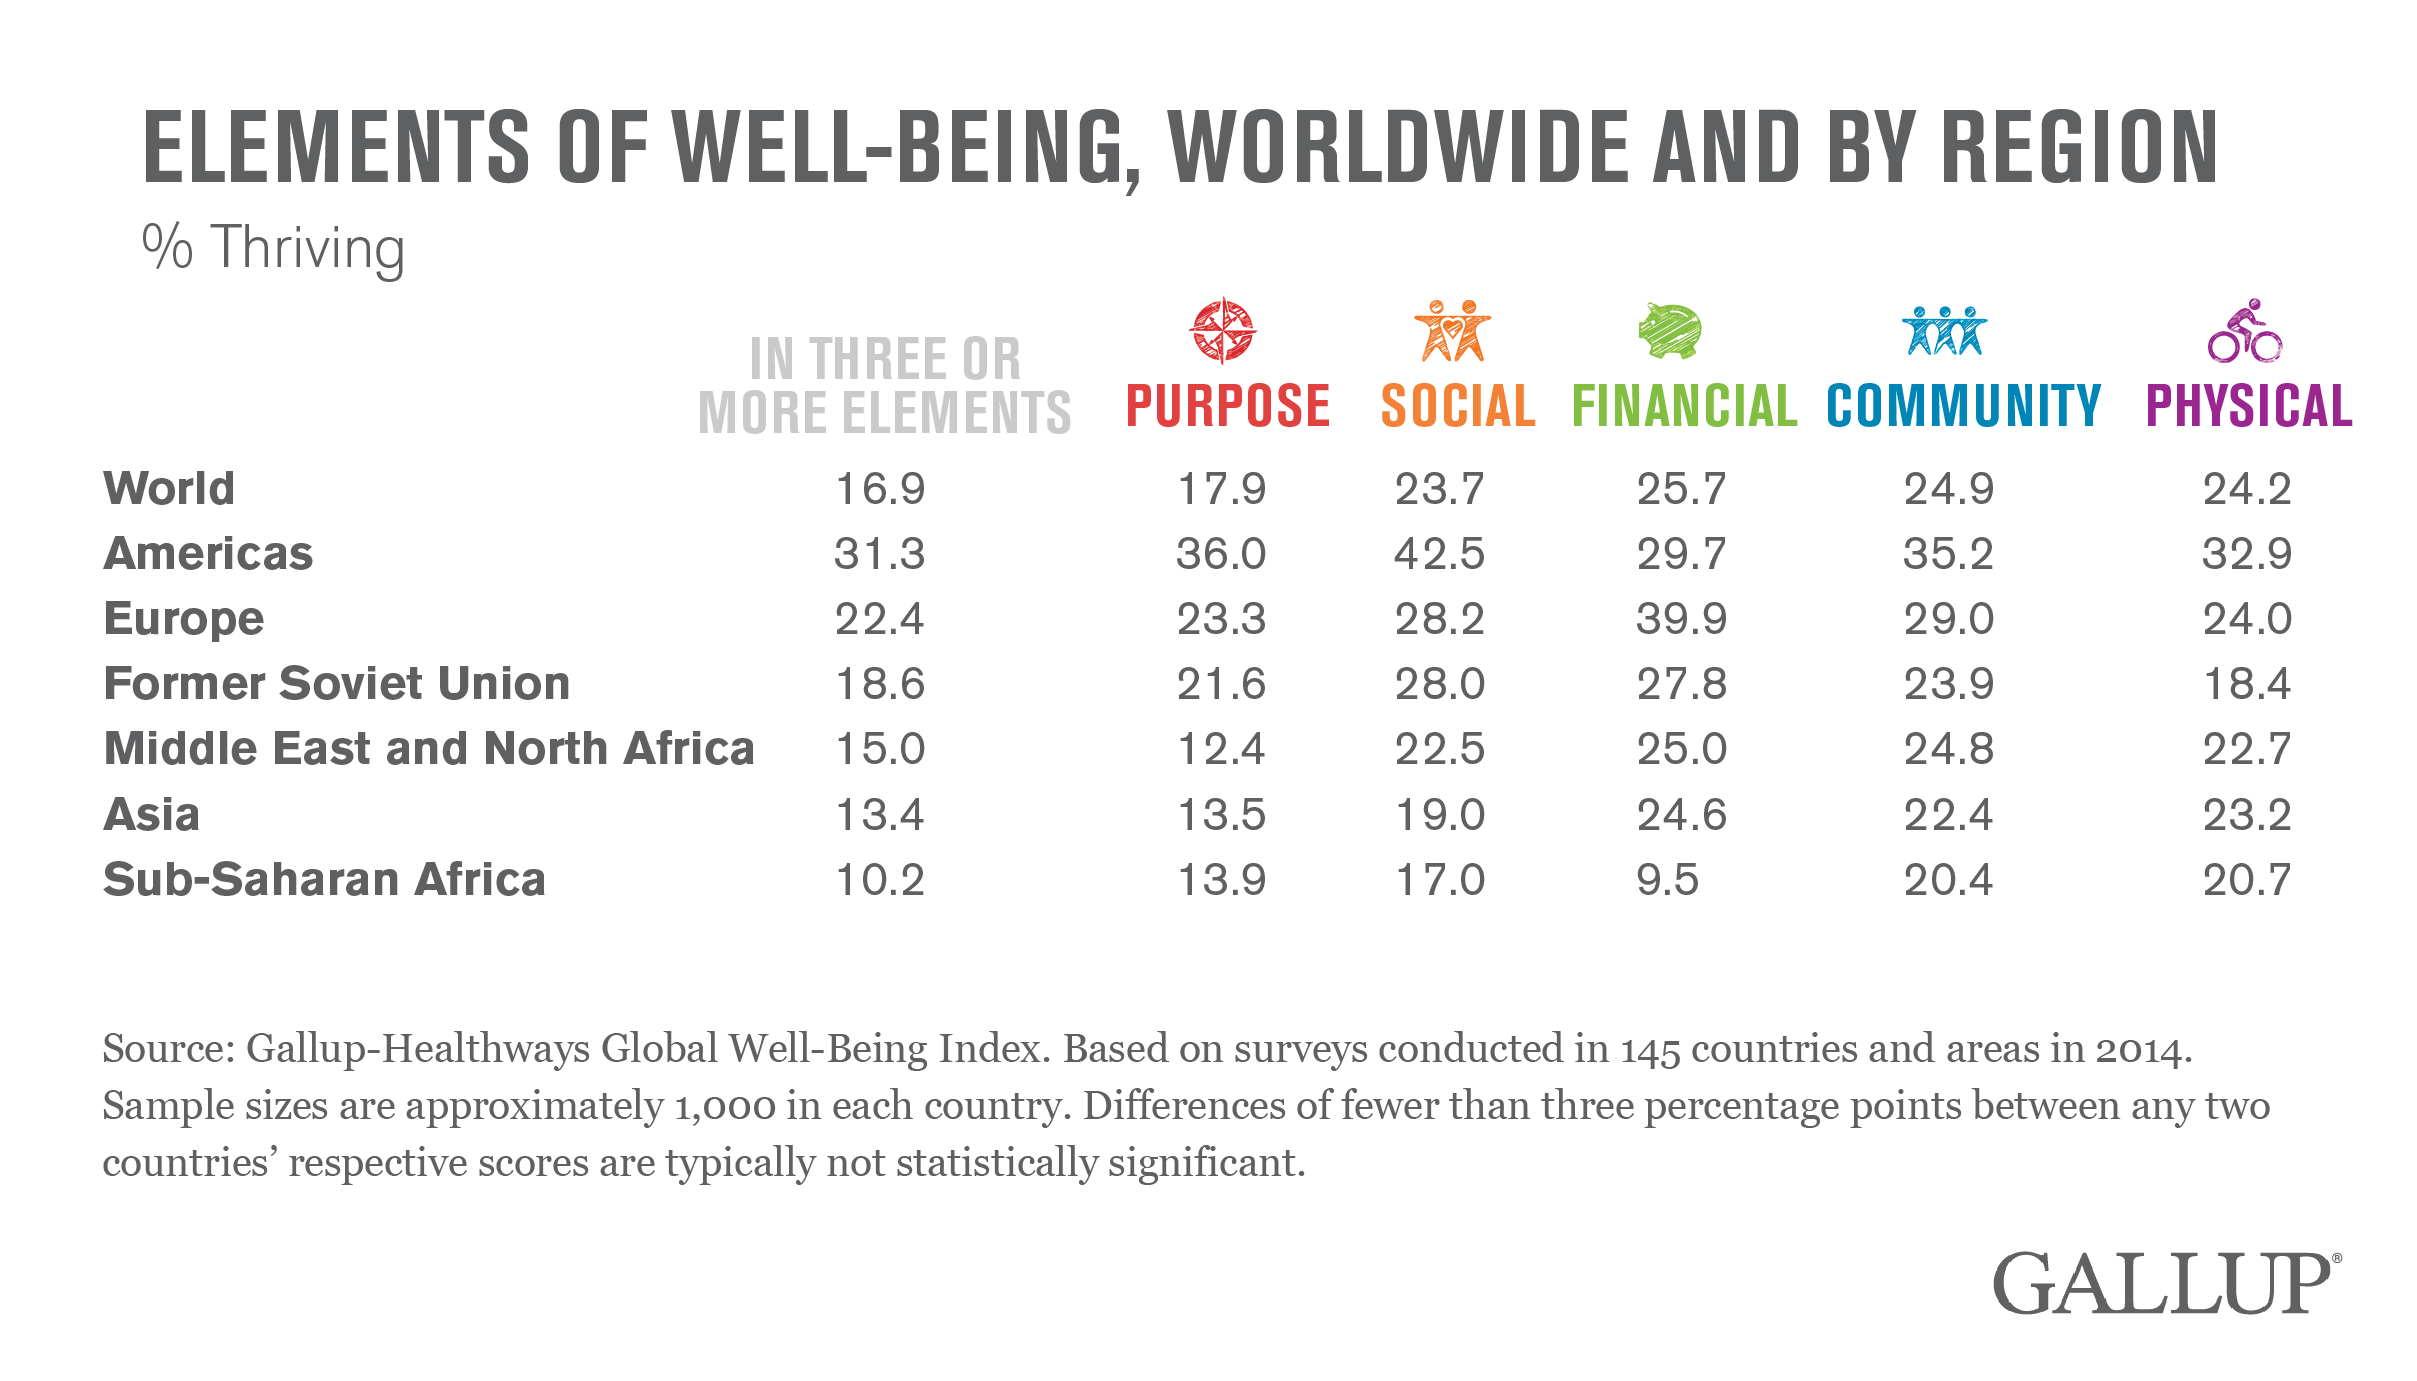 Elements of Well-Being, Worldwide and by Region, 2014